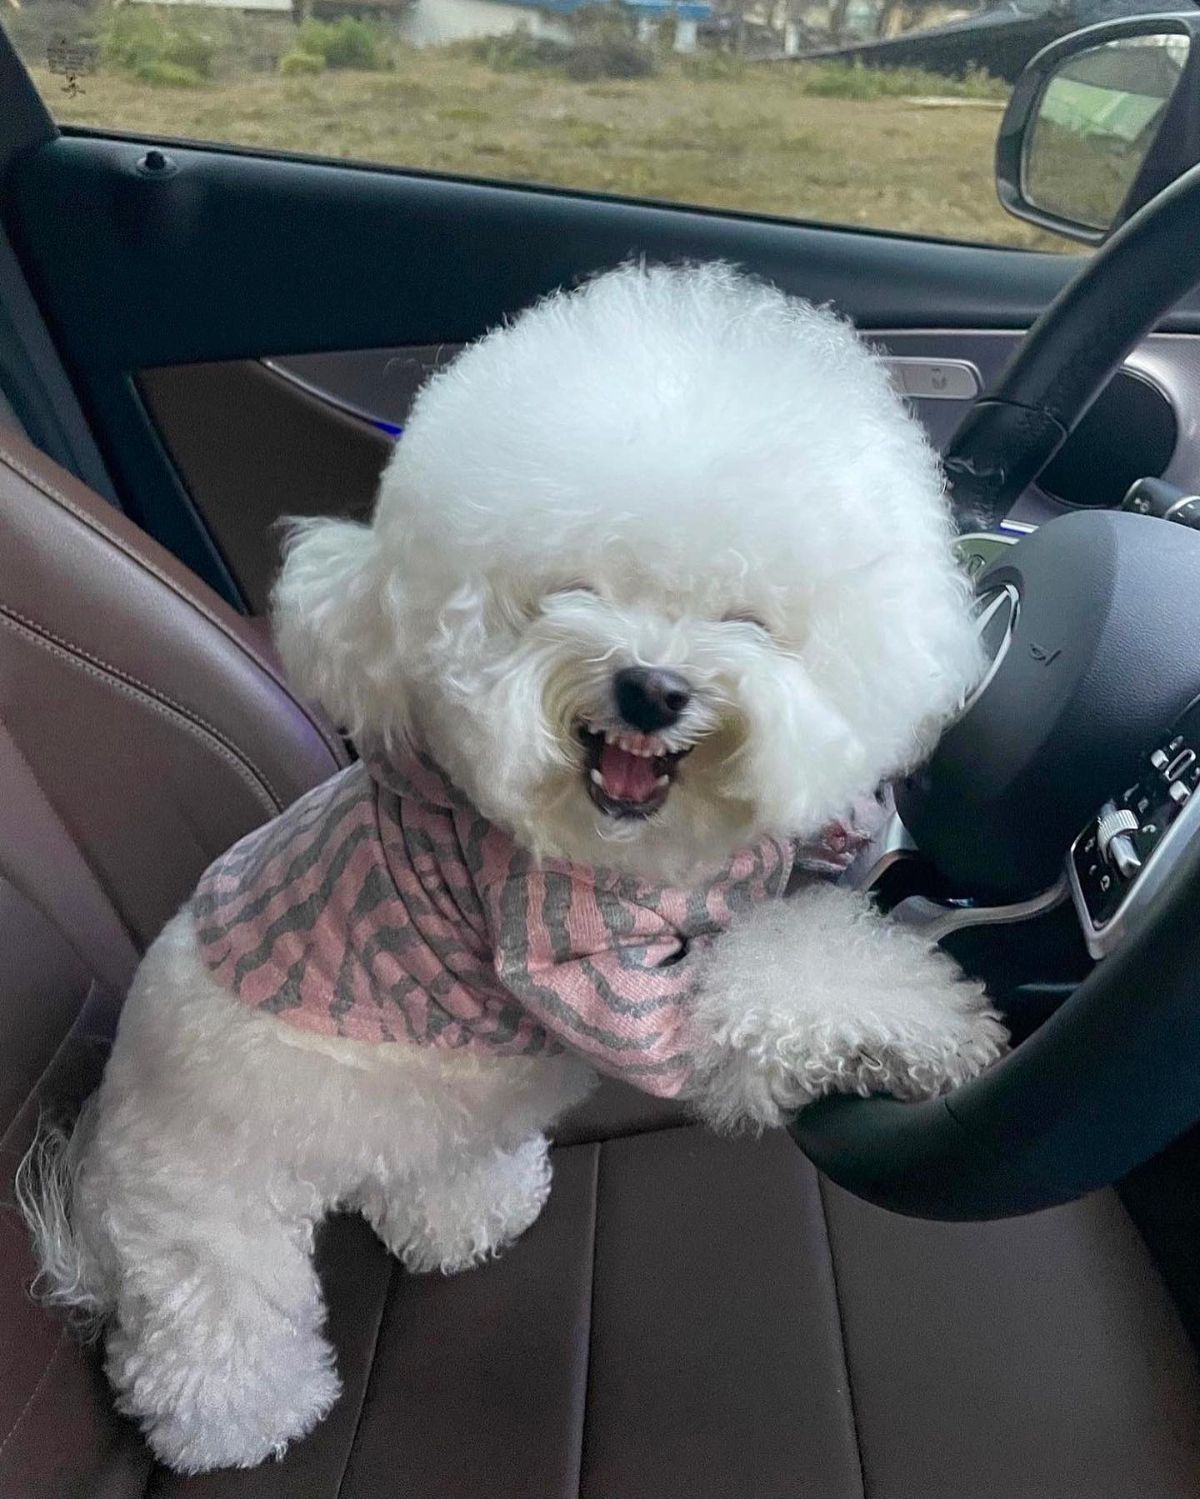 small fluffy white dog wearing a pink and grey shirt standing on hind legs with paws on a steering wheel inside a car